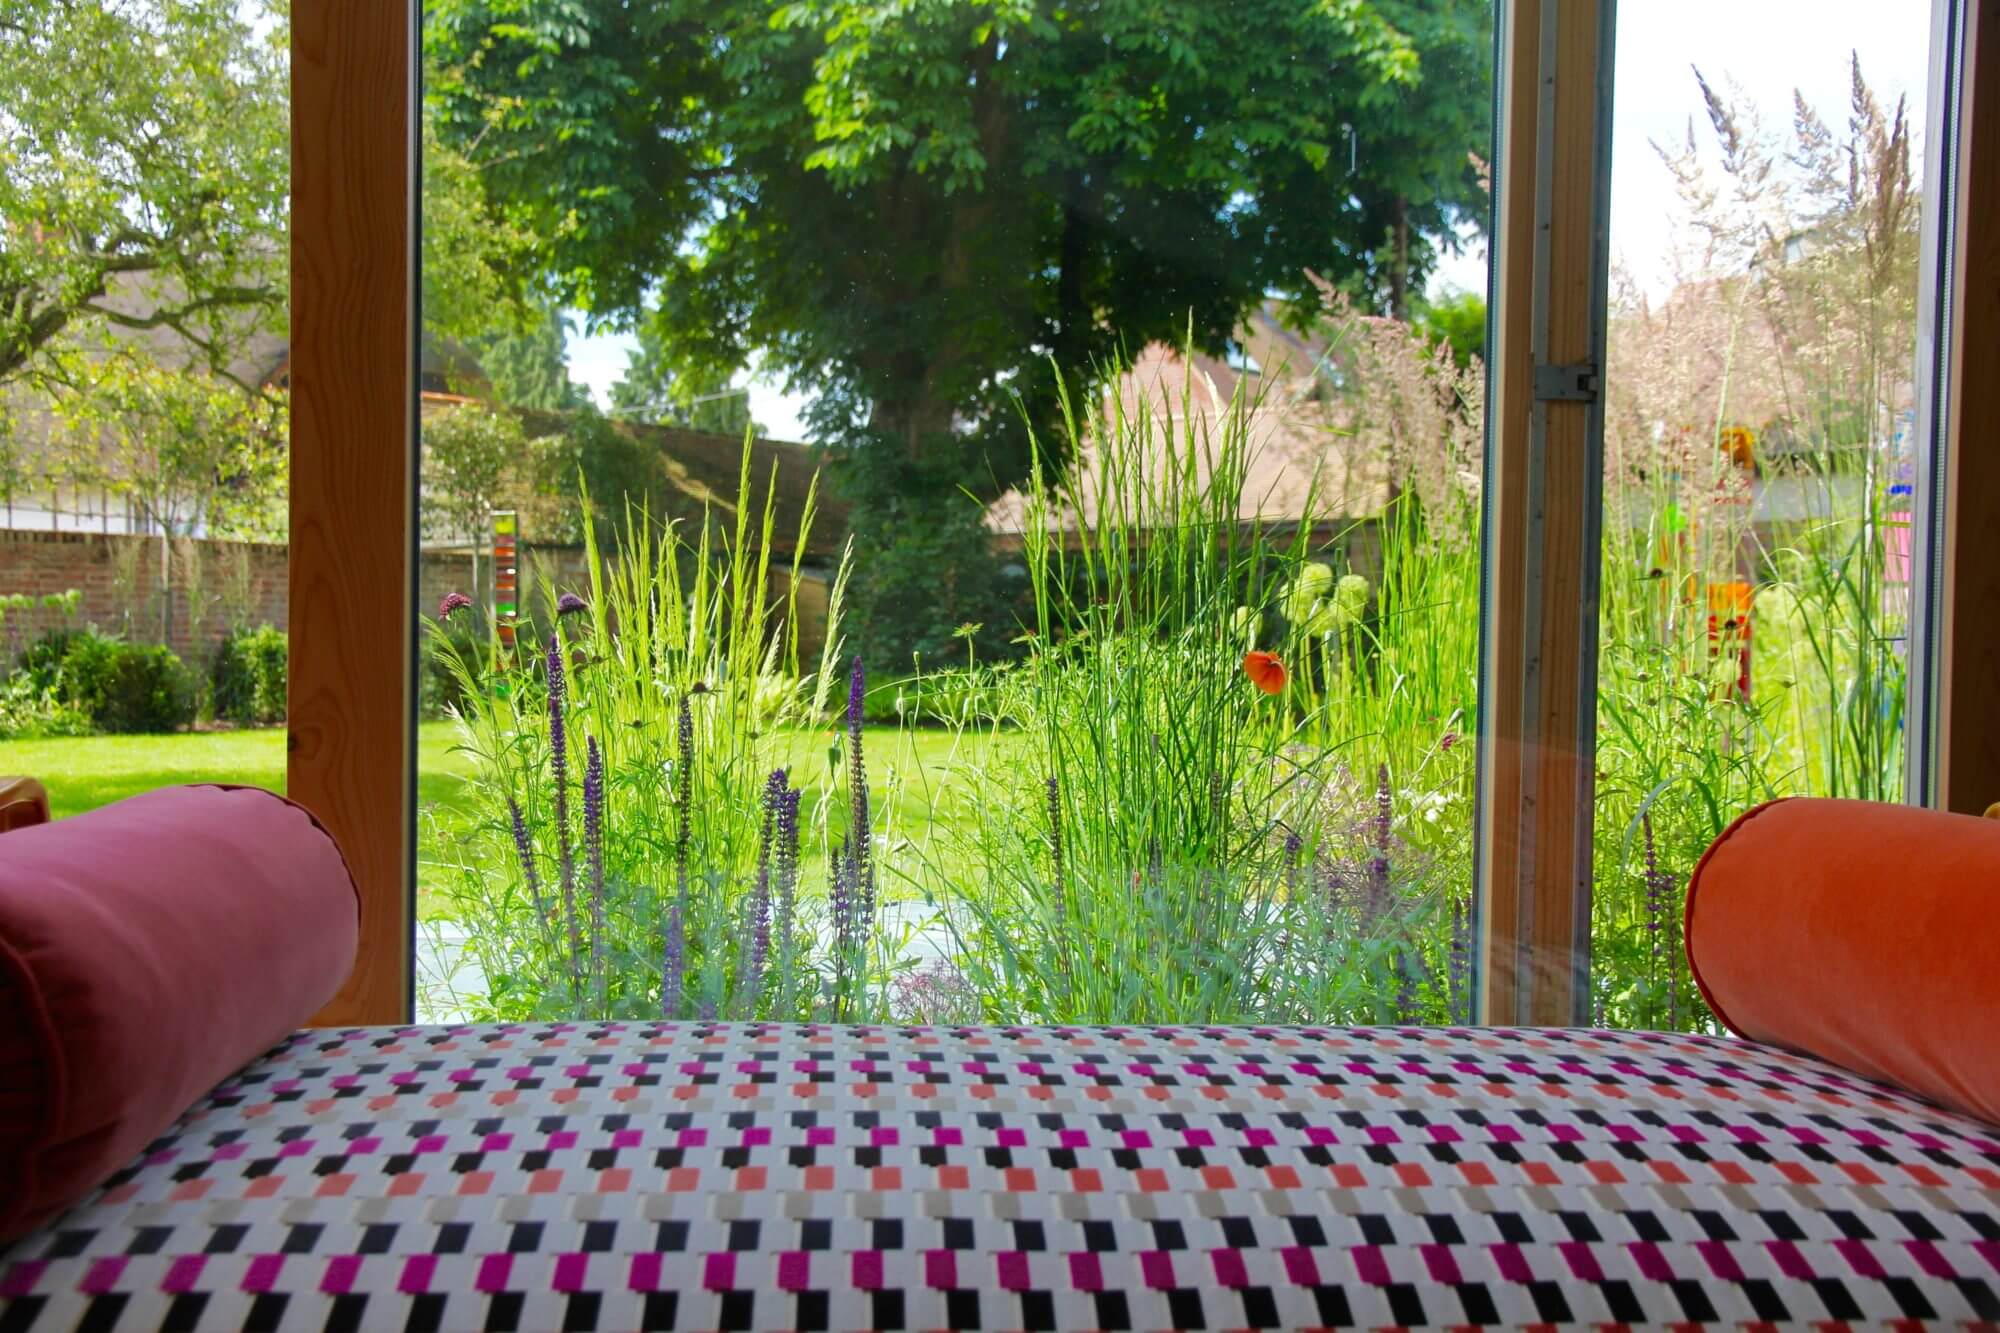 Colourful couch in front of french doors. Through the doors is a meadow of flowers